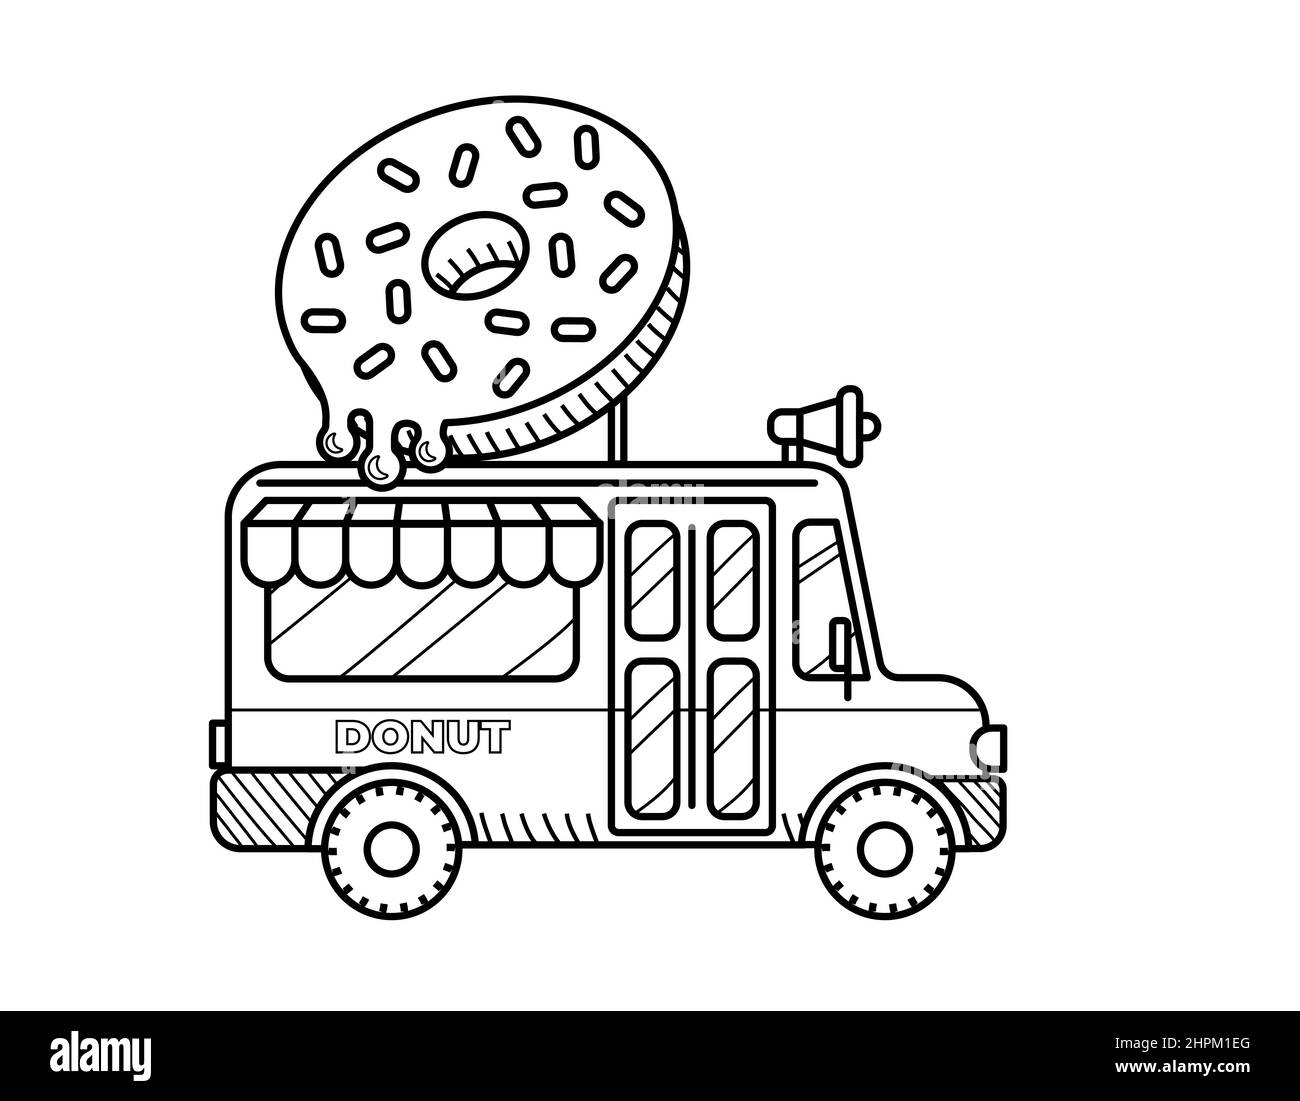 Donut van coloring page for kids. Food truck Stock Vector